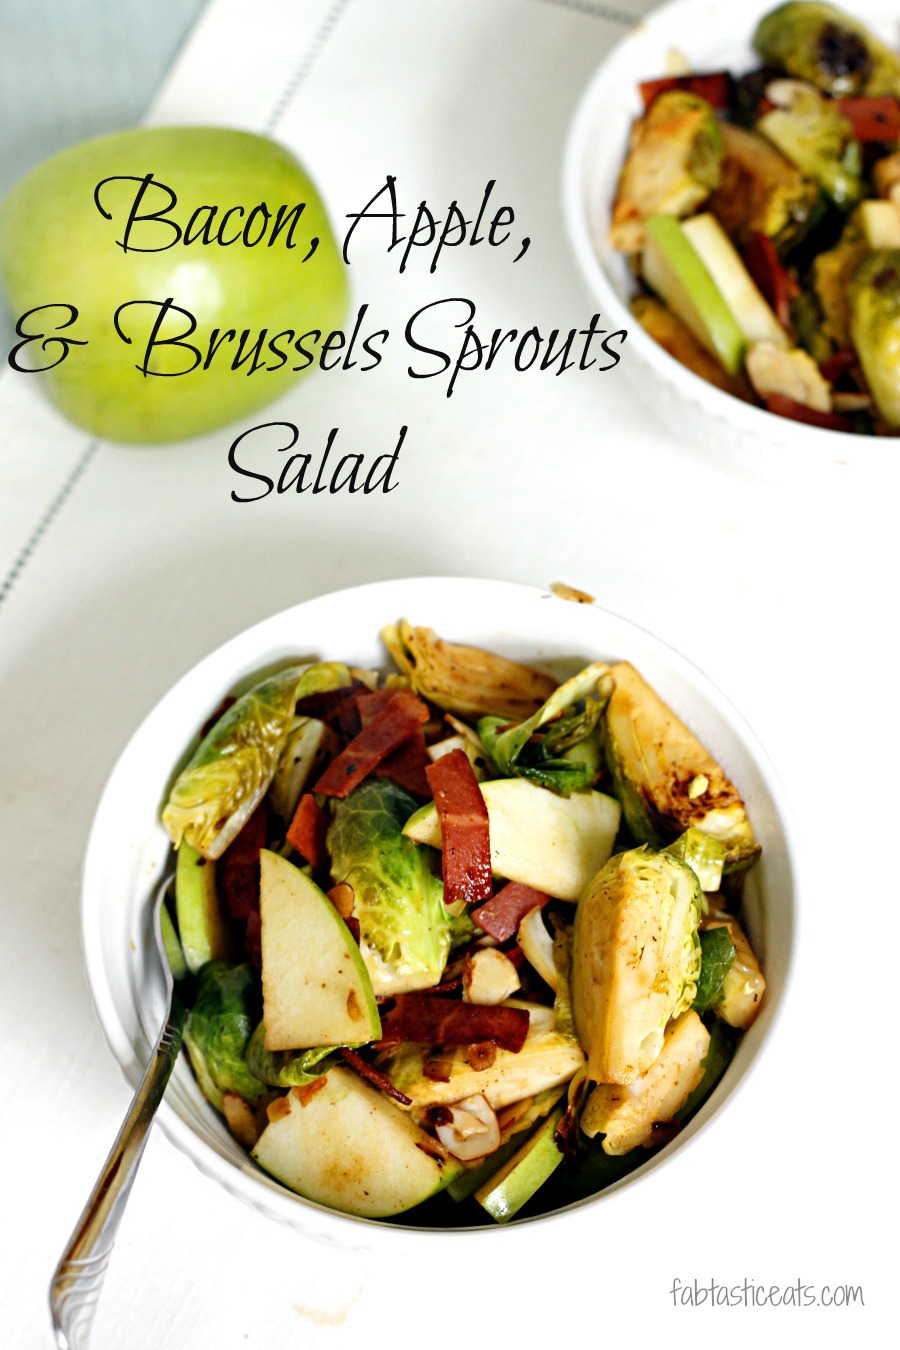 Bacon, Apple, and Brussels Sprouts Salad